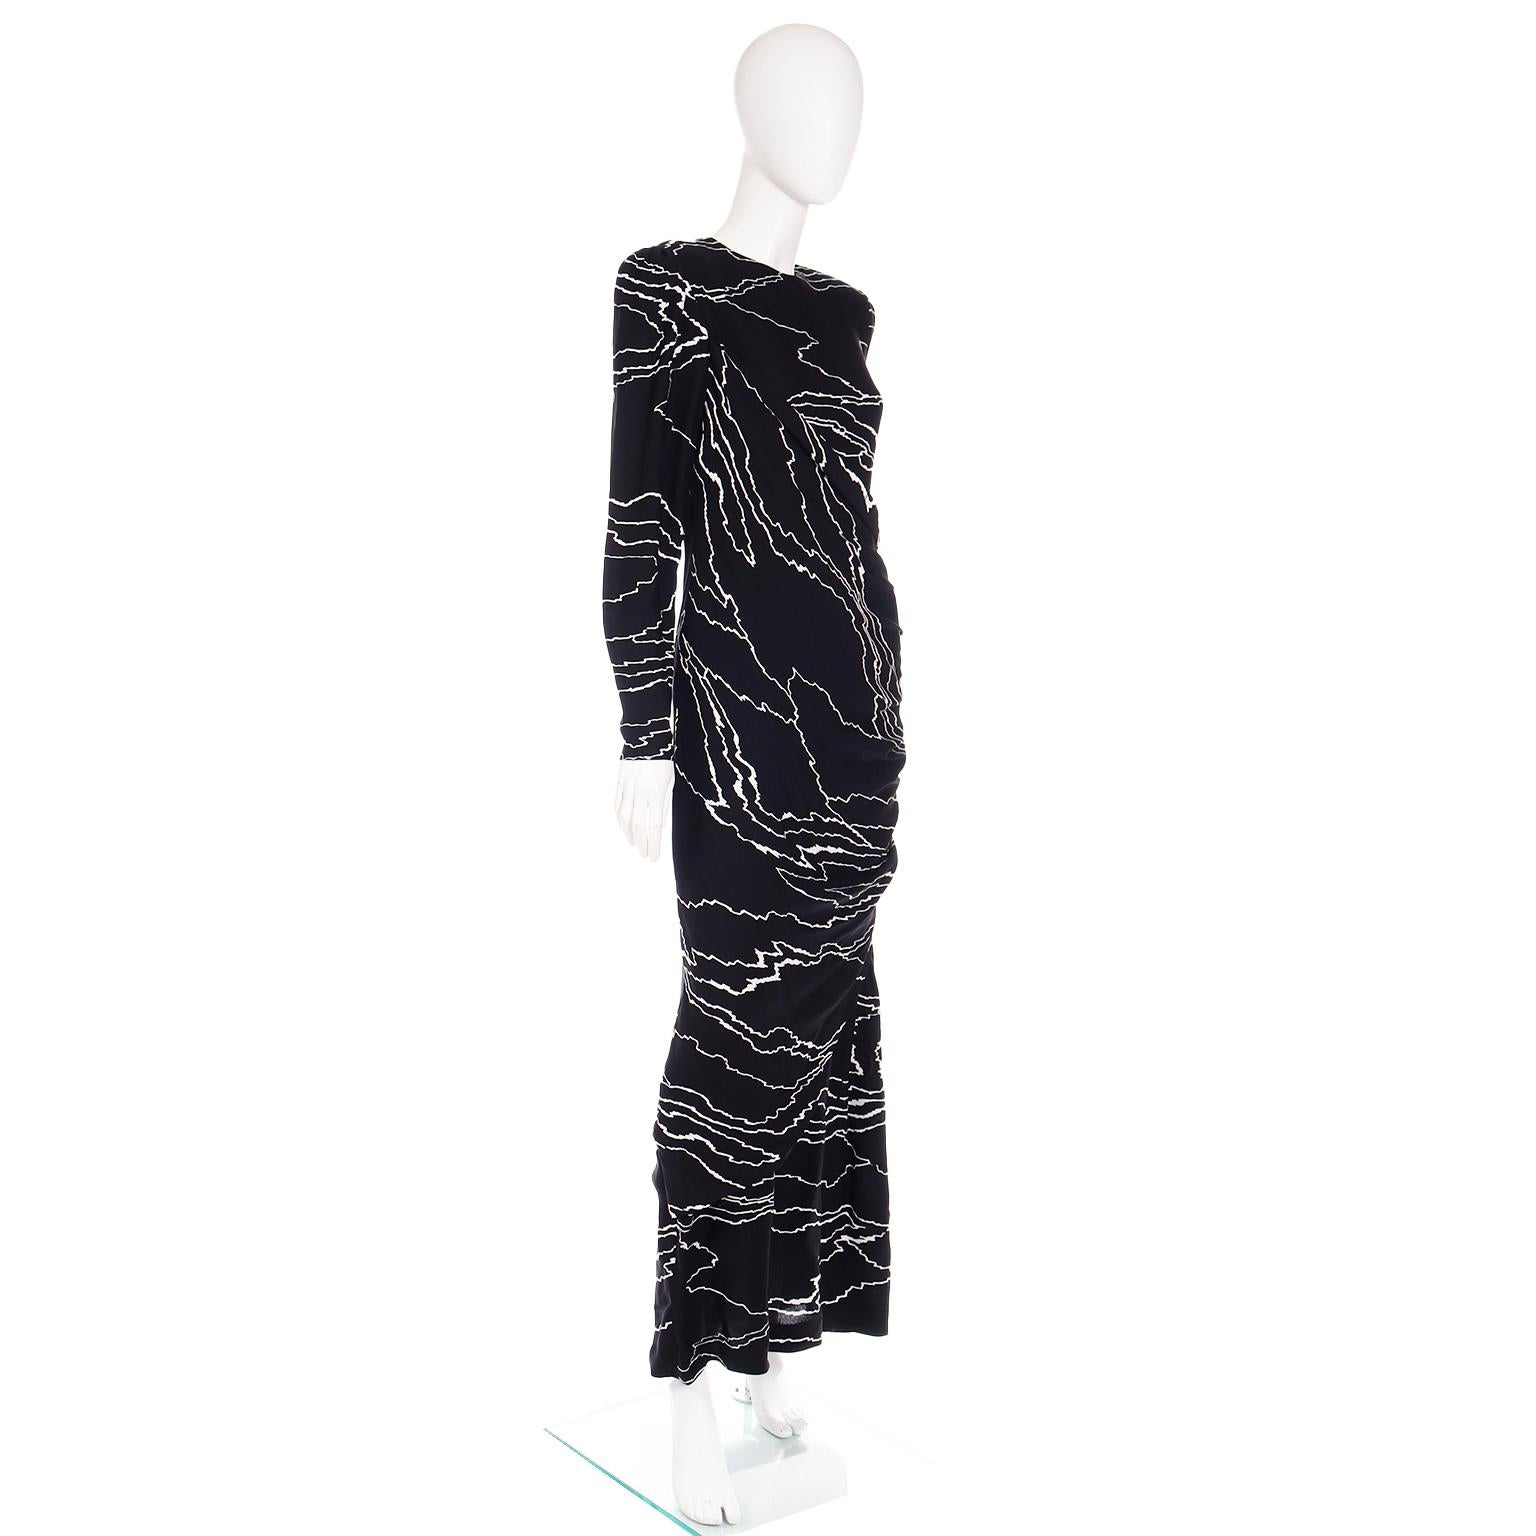 1985 Bill Blass Vintage Runway Dress Abstract Black White Evening Gown Draping For Sale 2